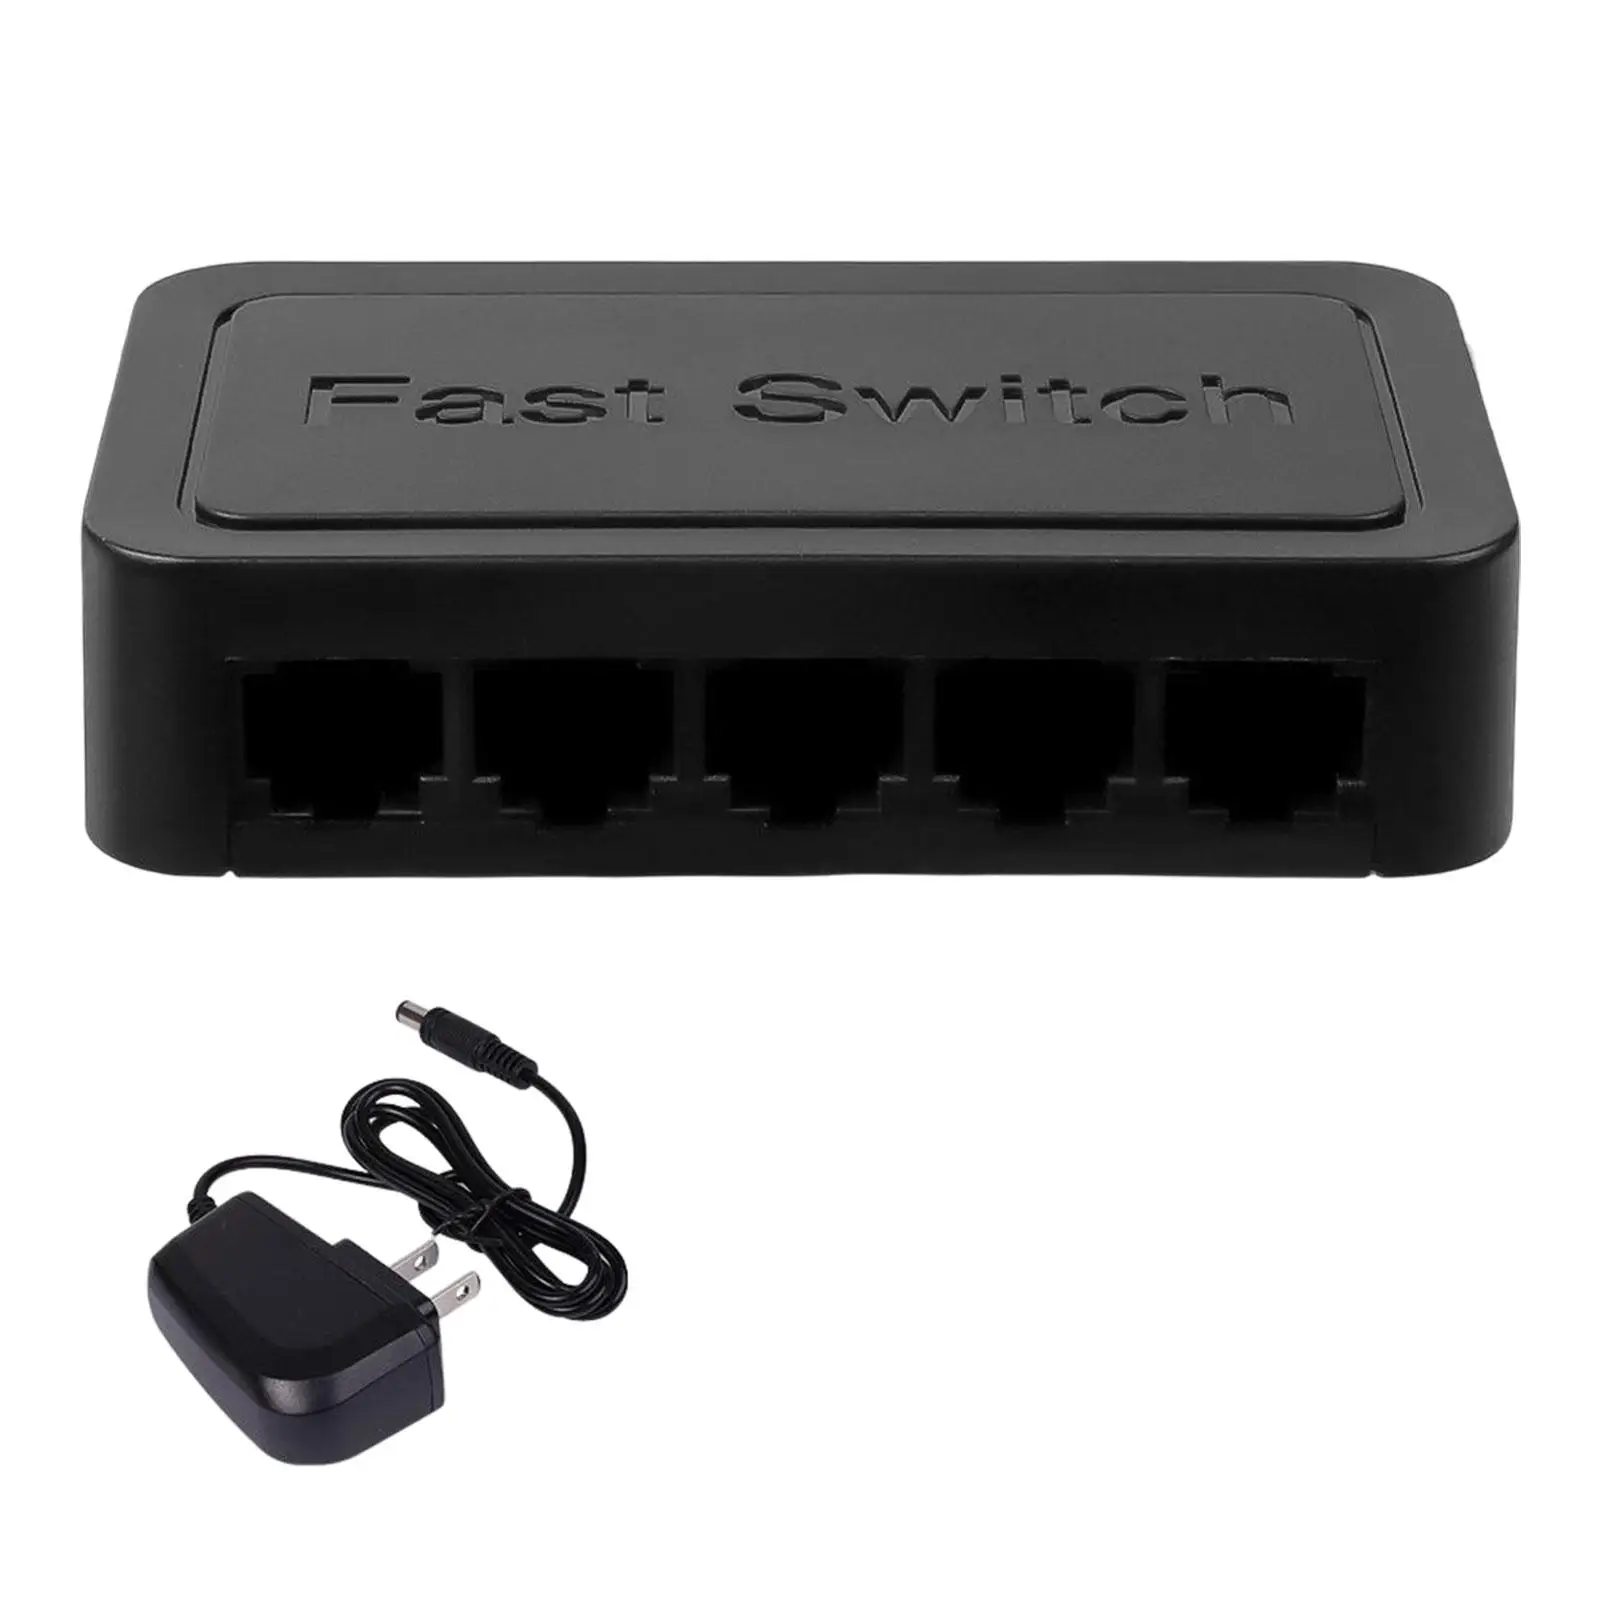 5 Port Gigabit Ethernet High Speed Fitments Easy to Use Mini Multifunction Switcher for Desktop Home Office Hotel Dormitory